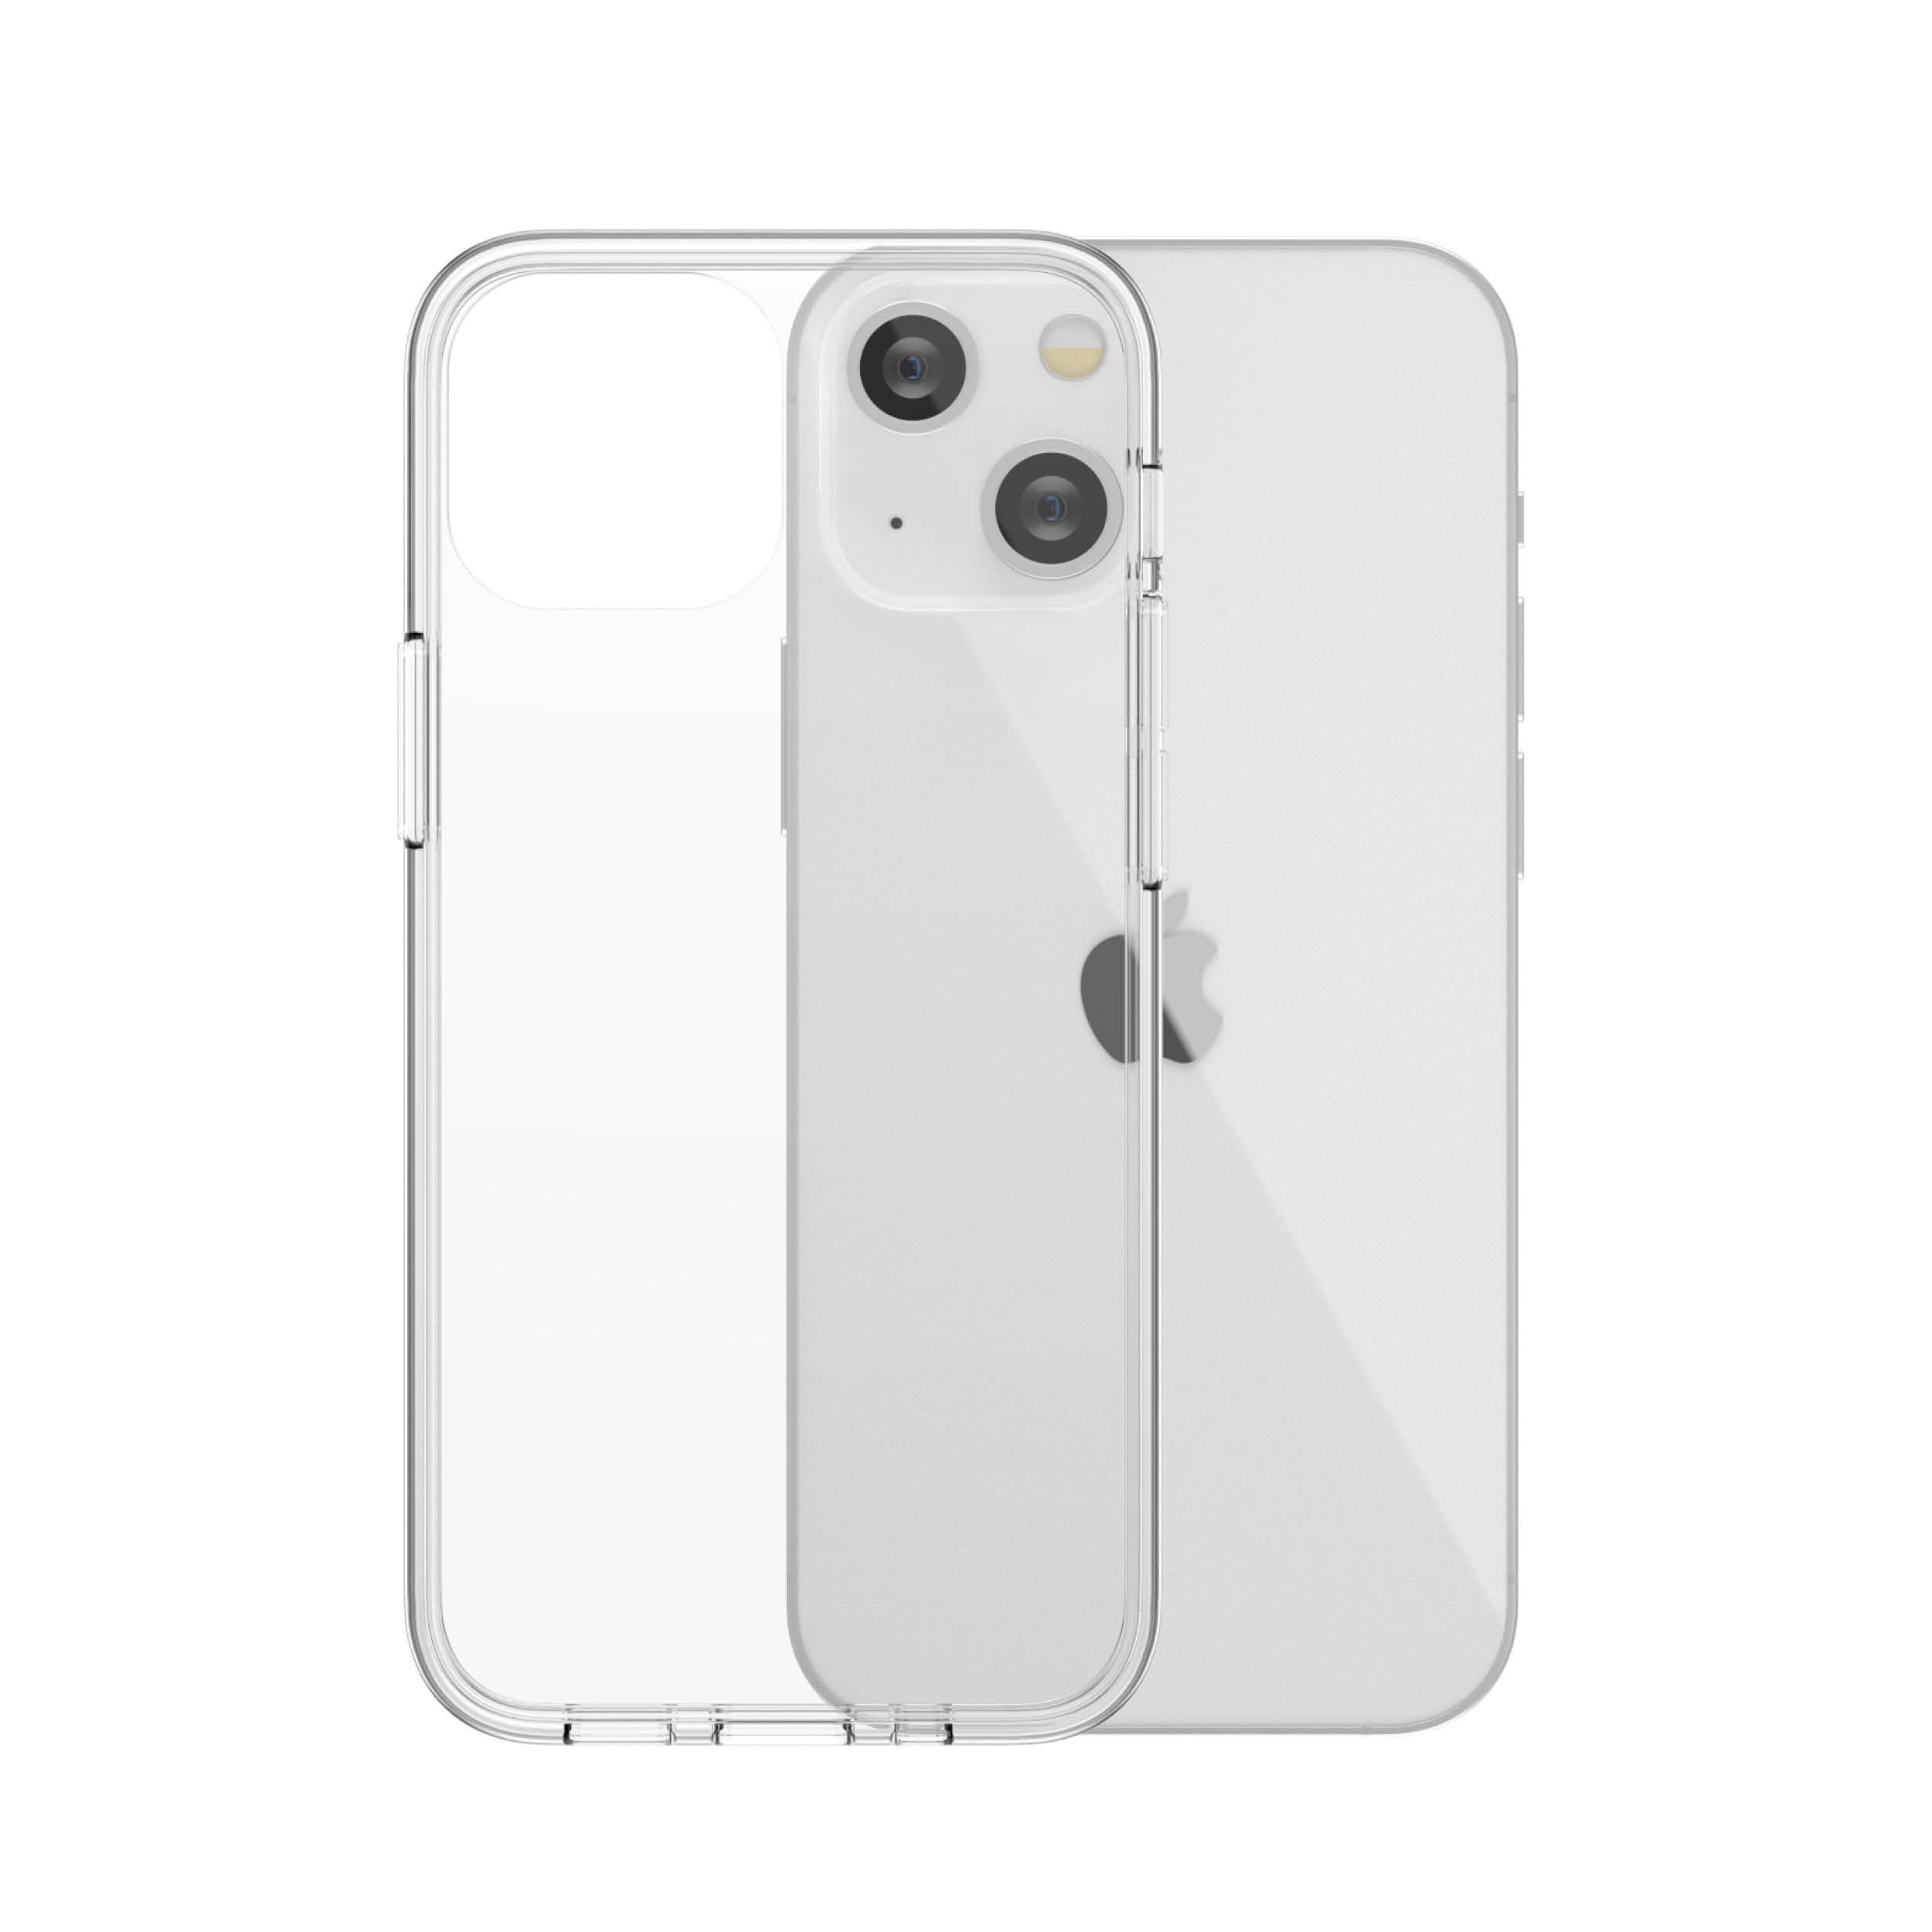 13 CLEAR APPLE, Backcover, MINI, ClearCase, PANZERGLASS IPHONE